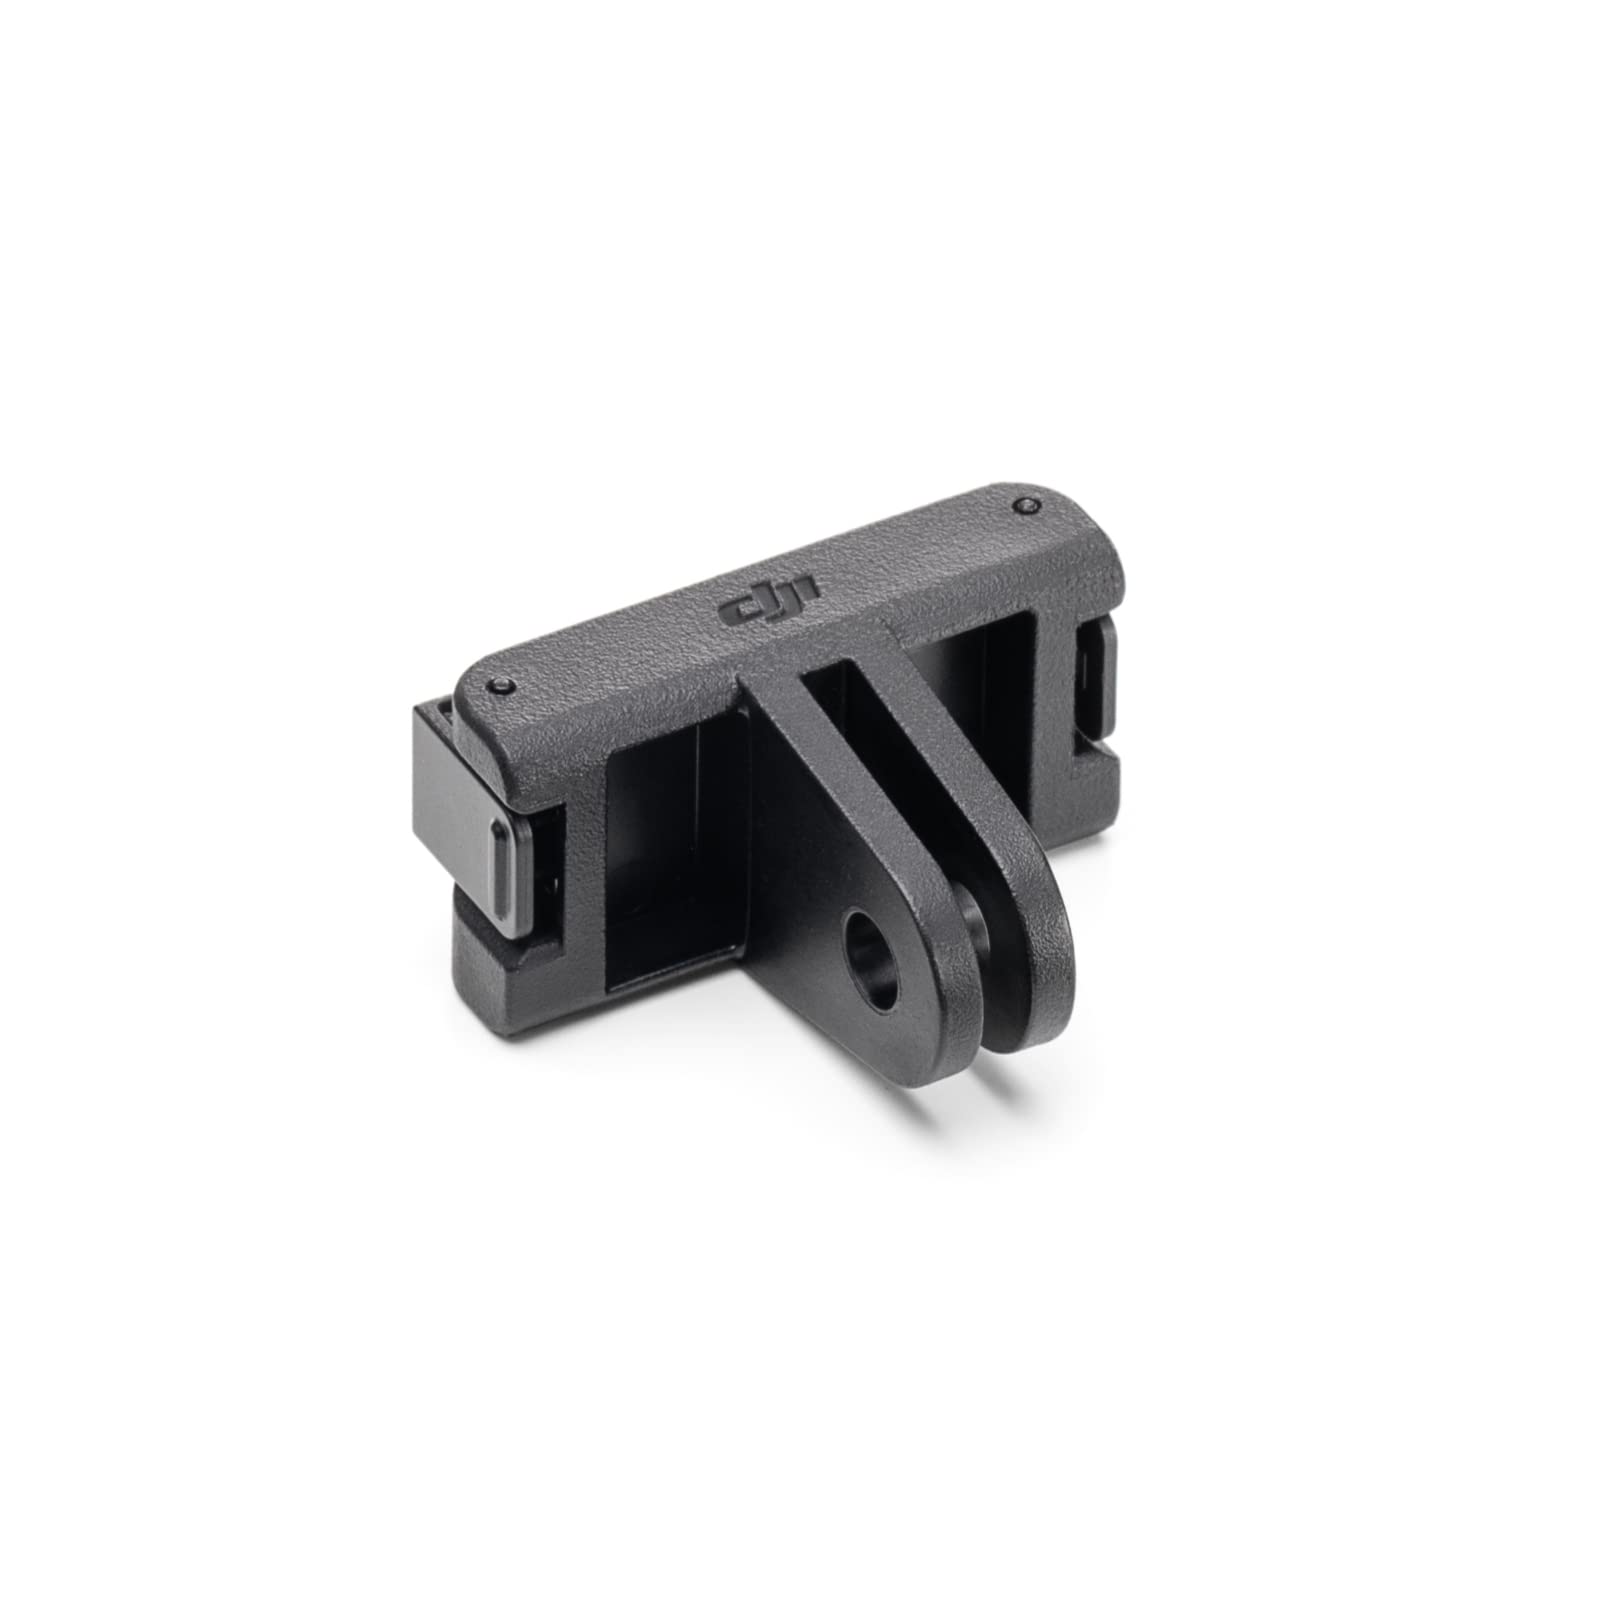 DJI Osmo Action Quick-Release Adapter Mount, Compatibility: Osmo Action 3, Osmo Action 4